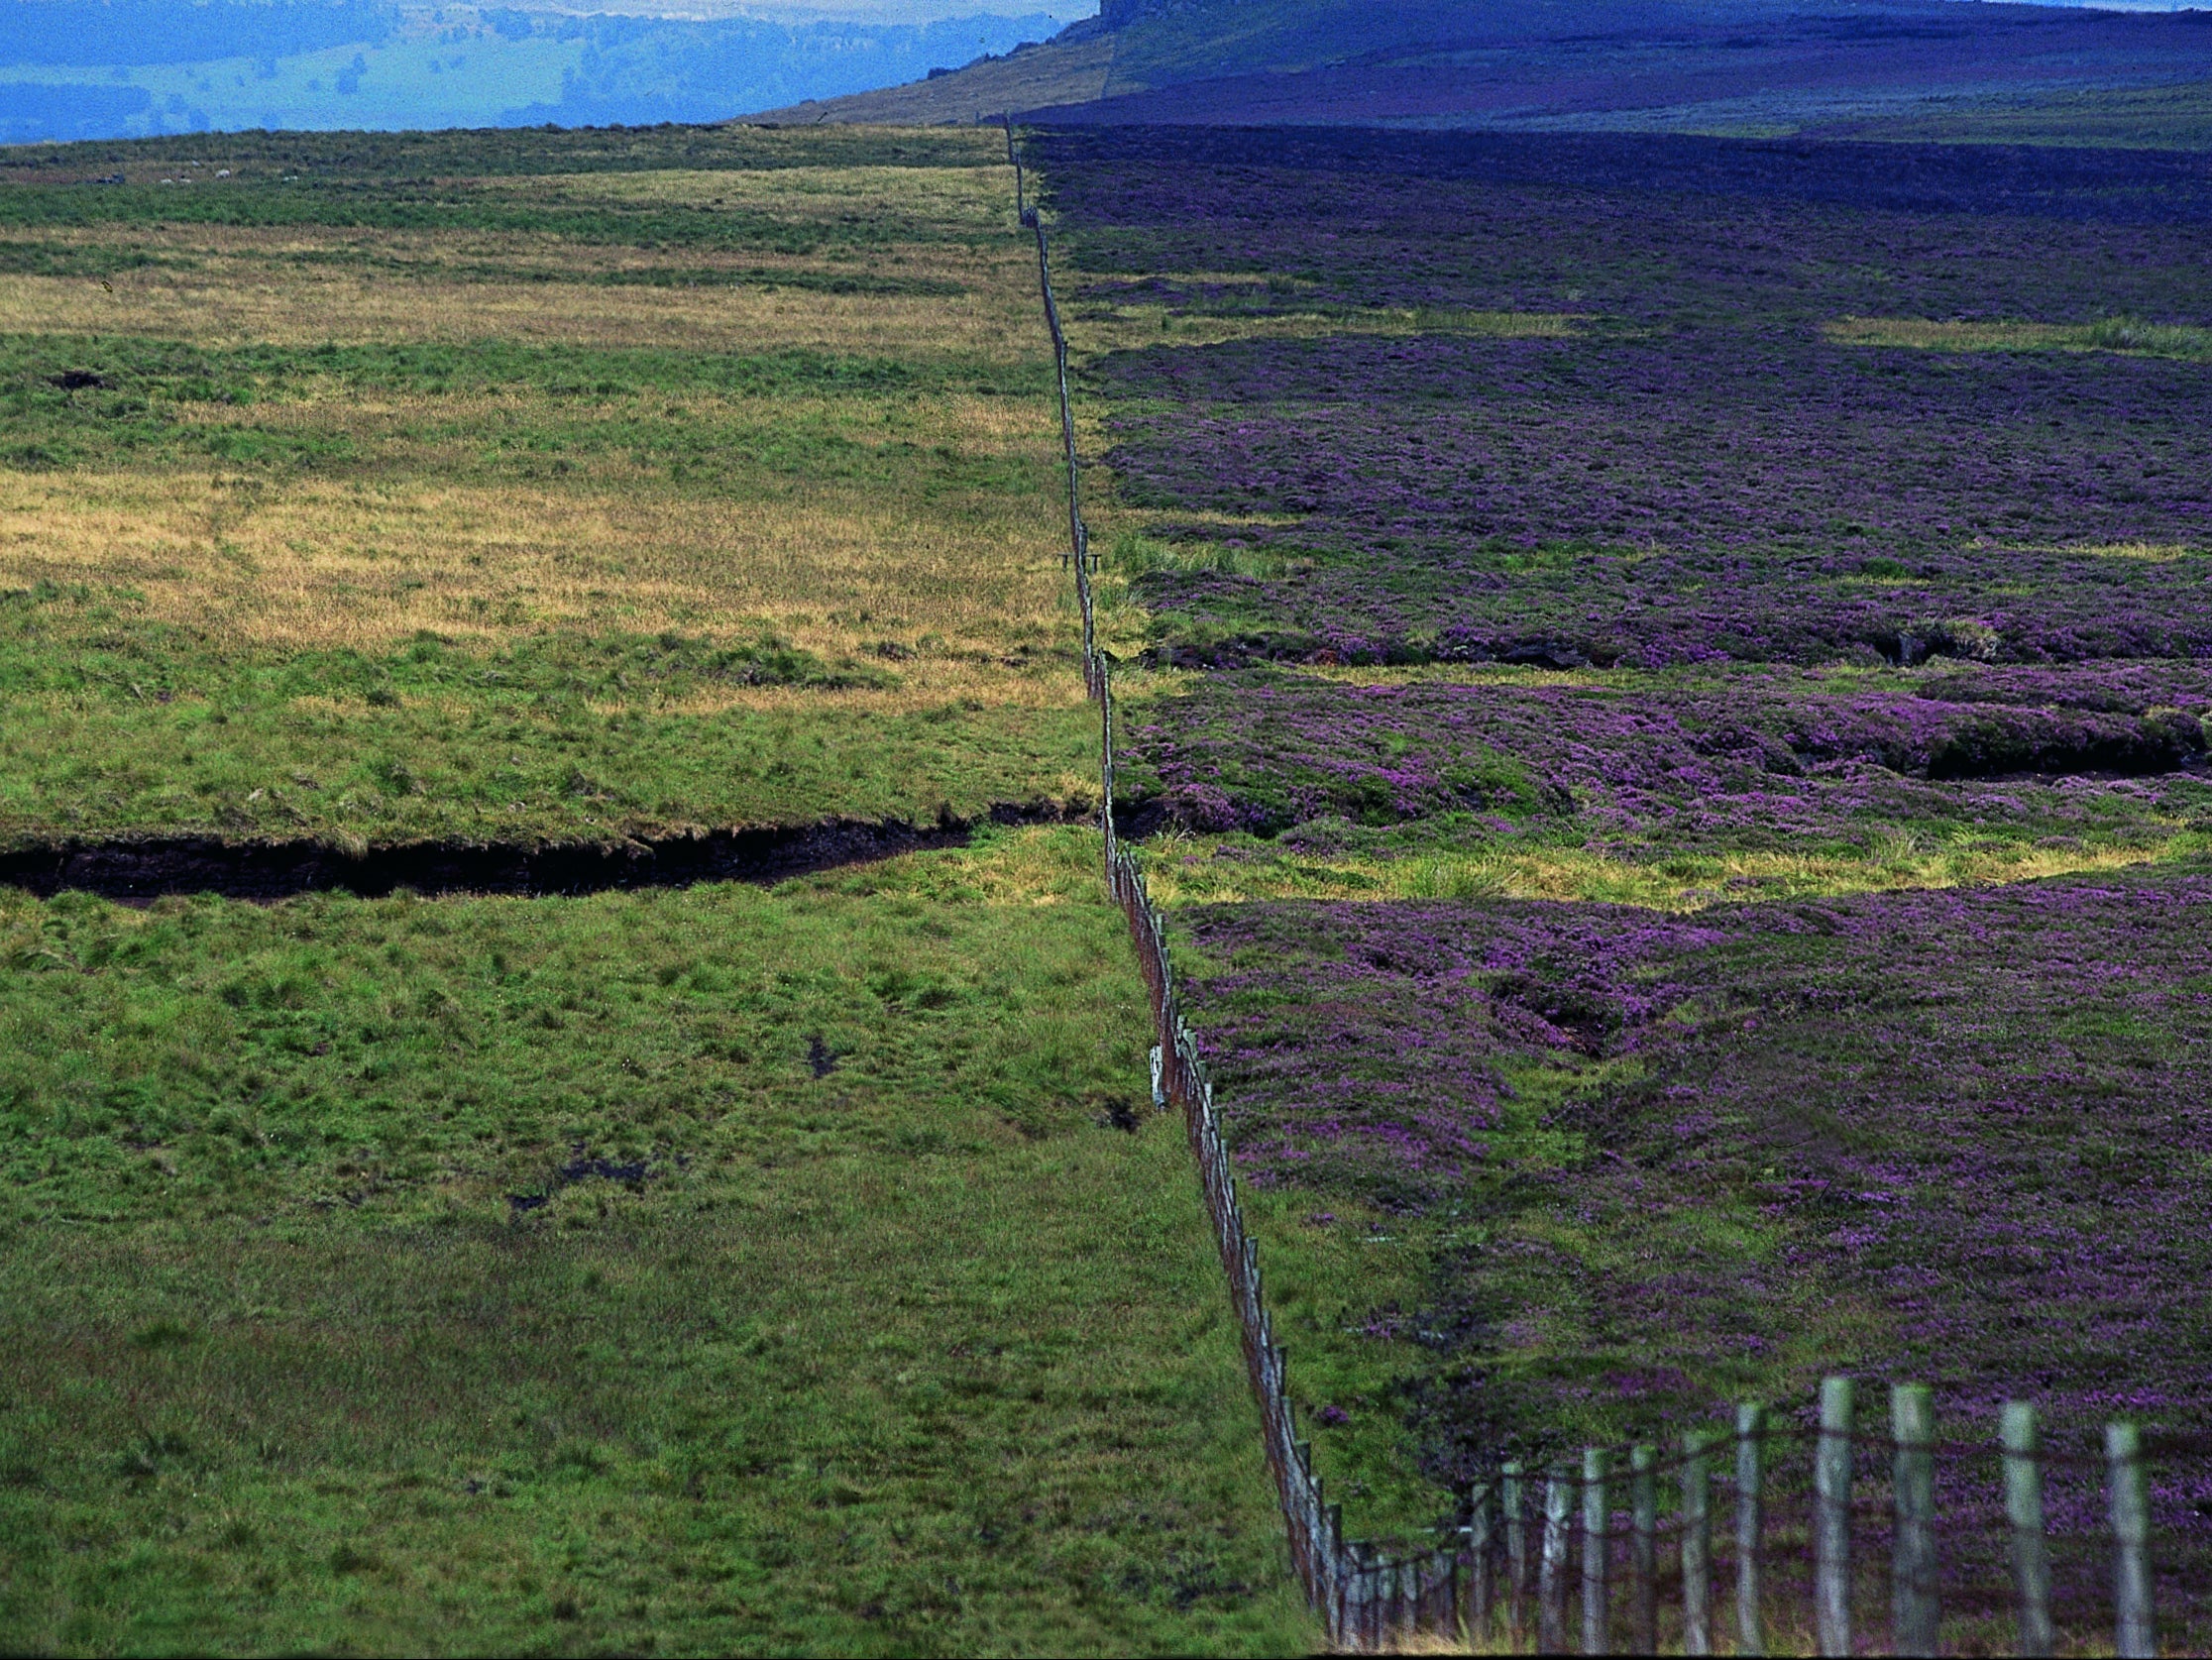 Grouse moors have been criticised for controlled burning of heather on peatland, seen on right of fence, which managers say is necessary to reduce wildfire risks